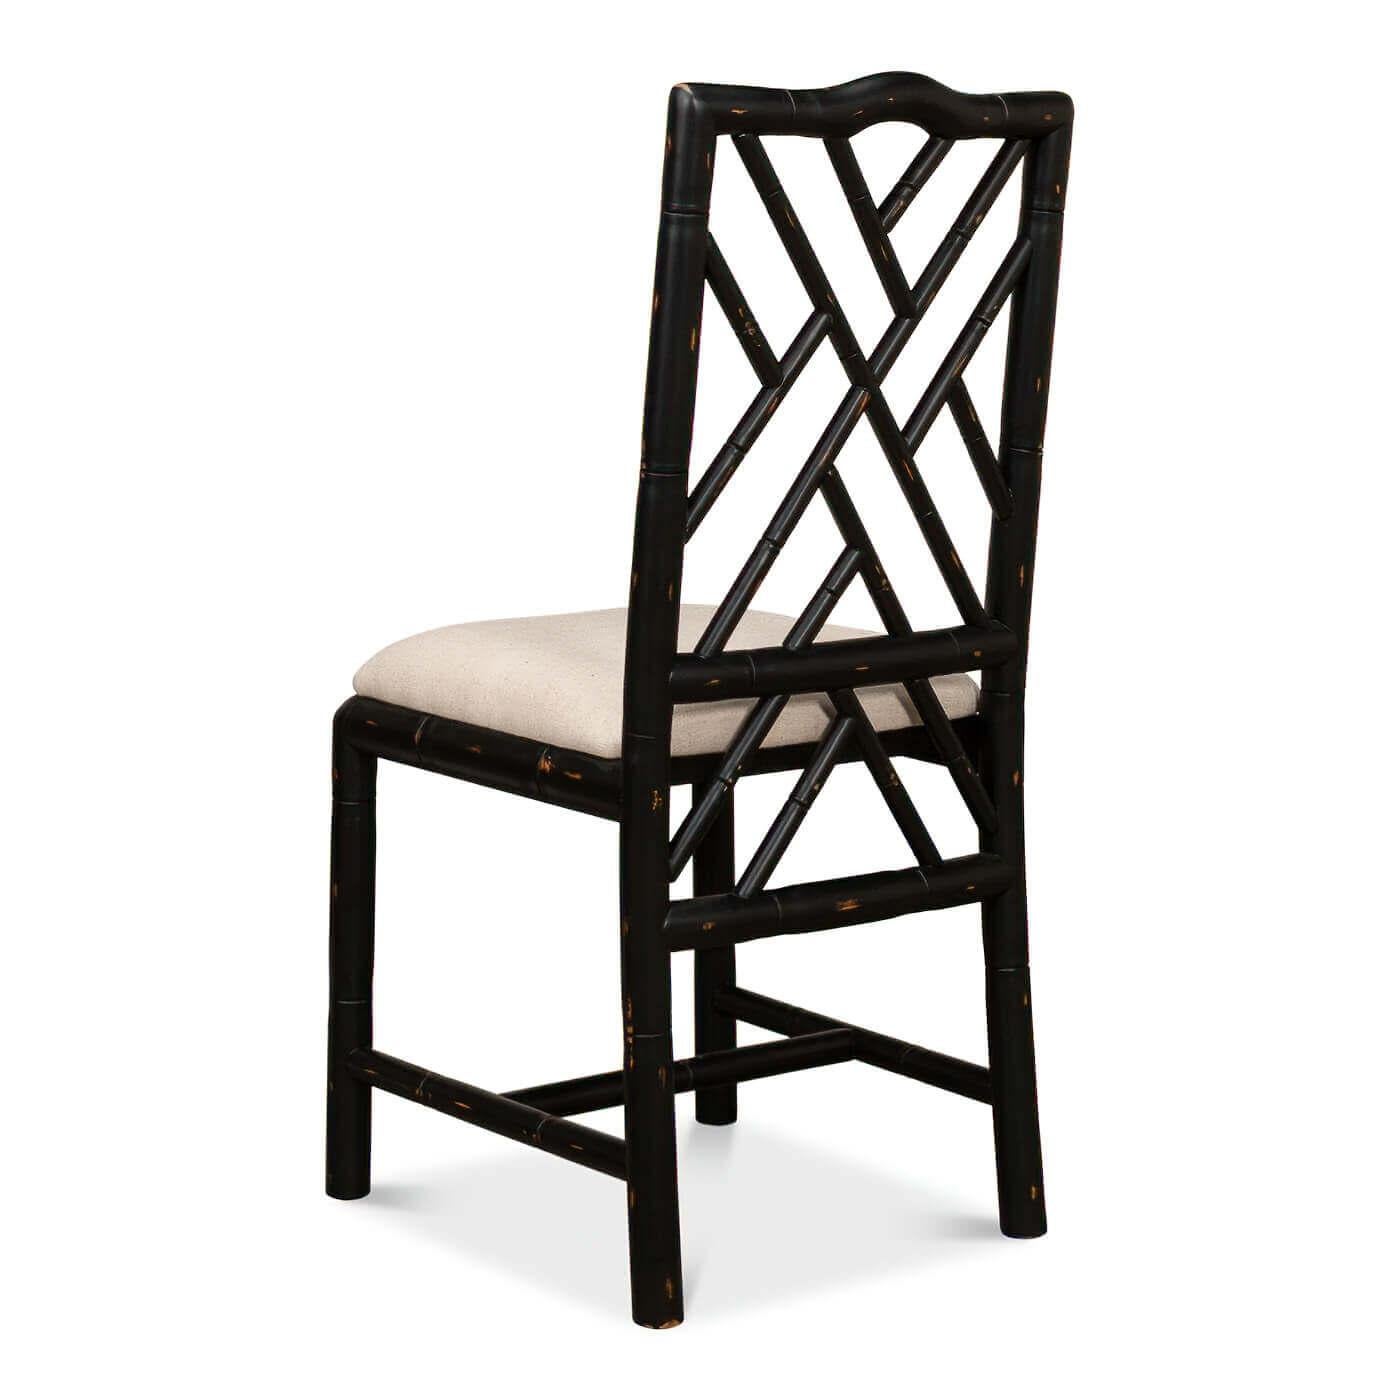 Regency Faux Bamboo Side Chair, Black Finish In New Condition For Sale In Westwood, NJ